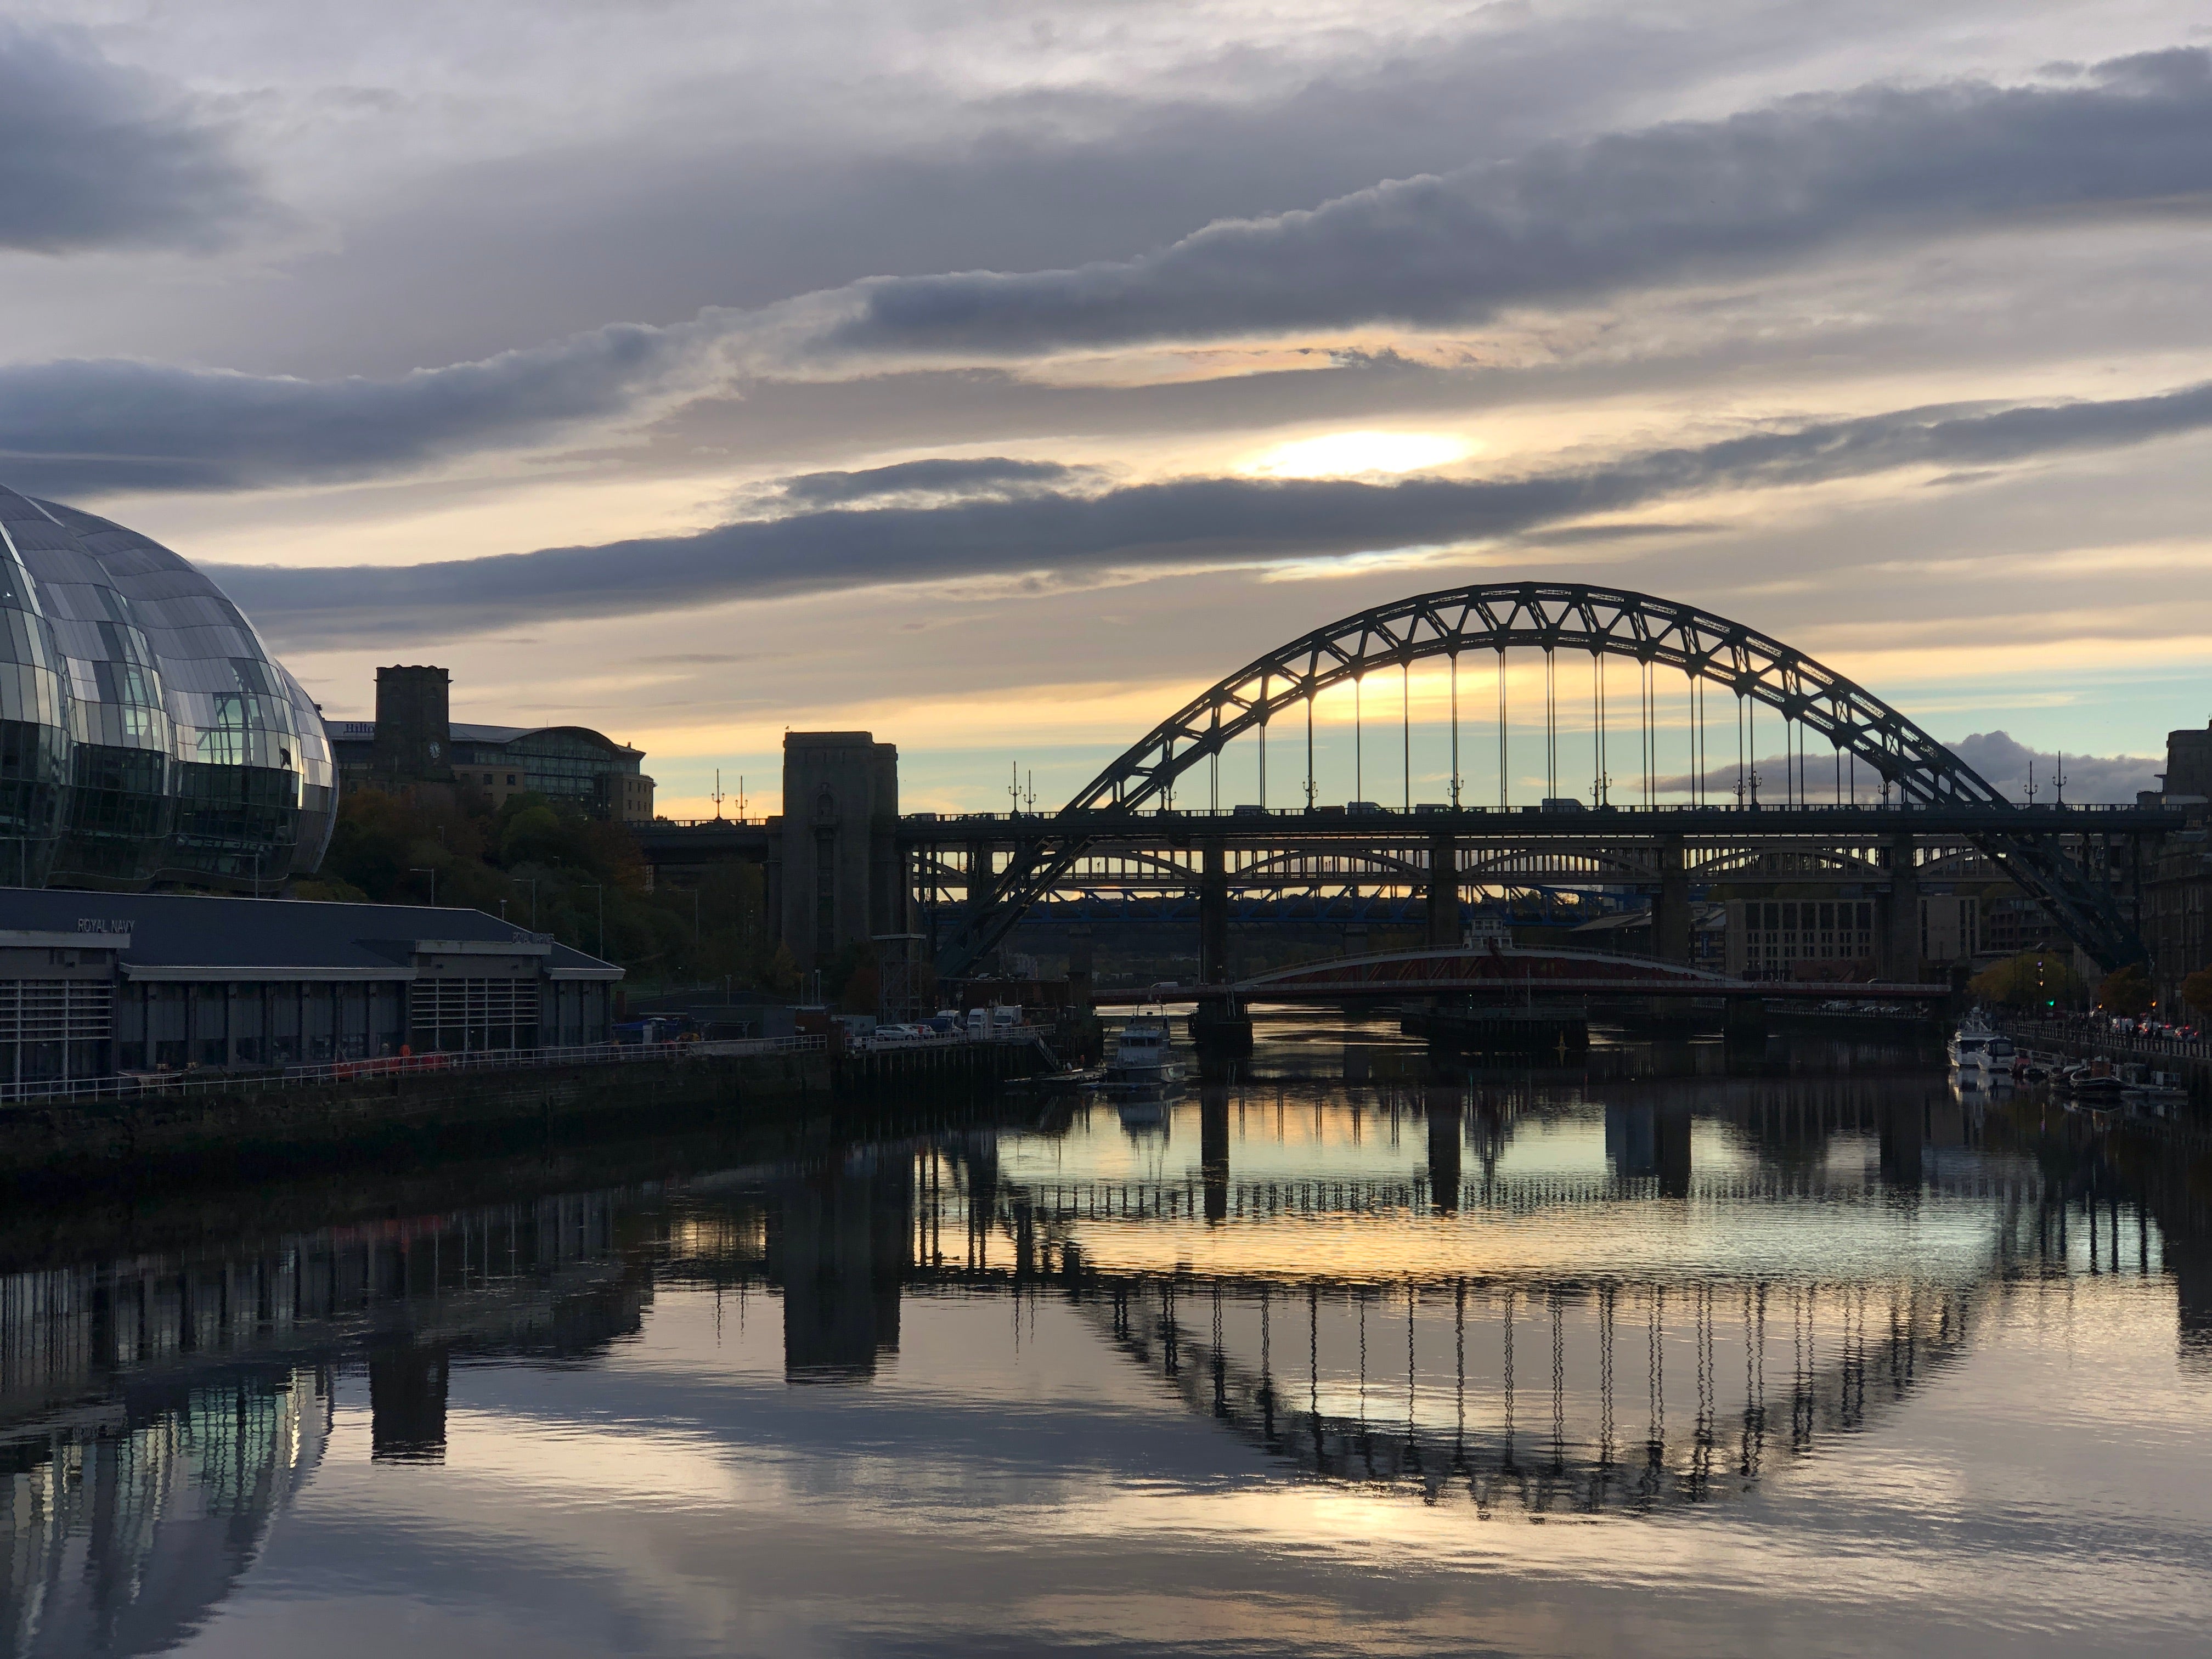 Forget the Tyne: only essential travel to Newcastle and elsewhere in the UK is allowed